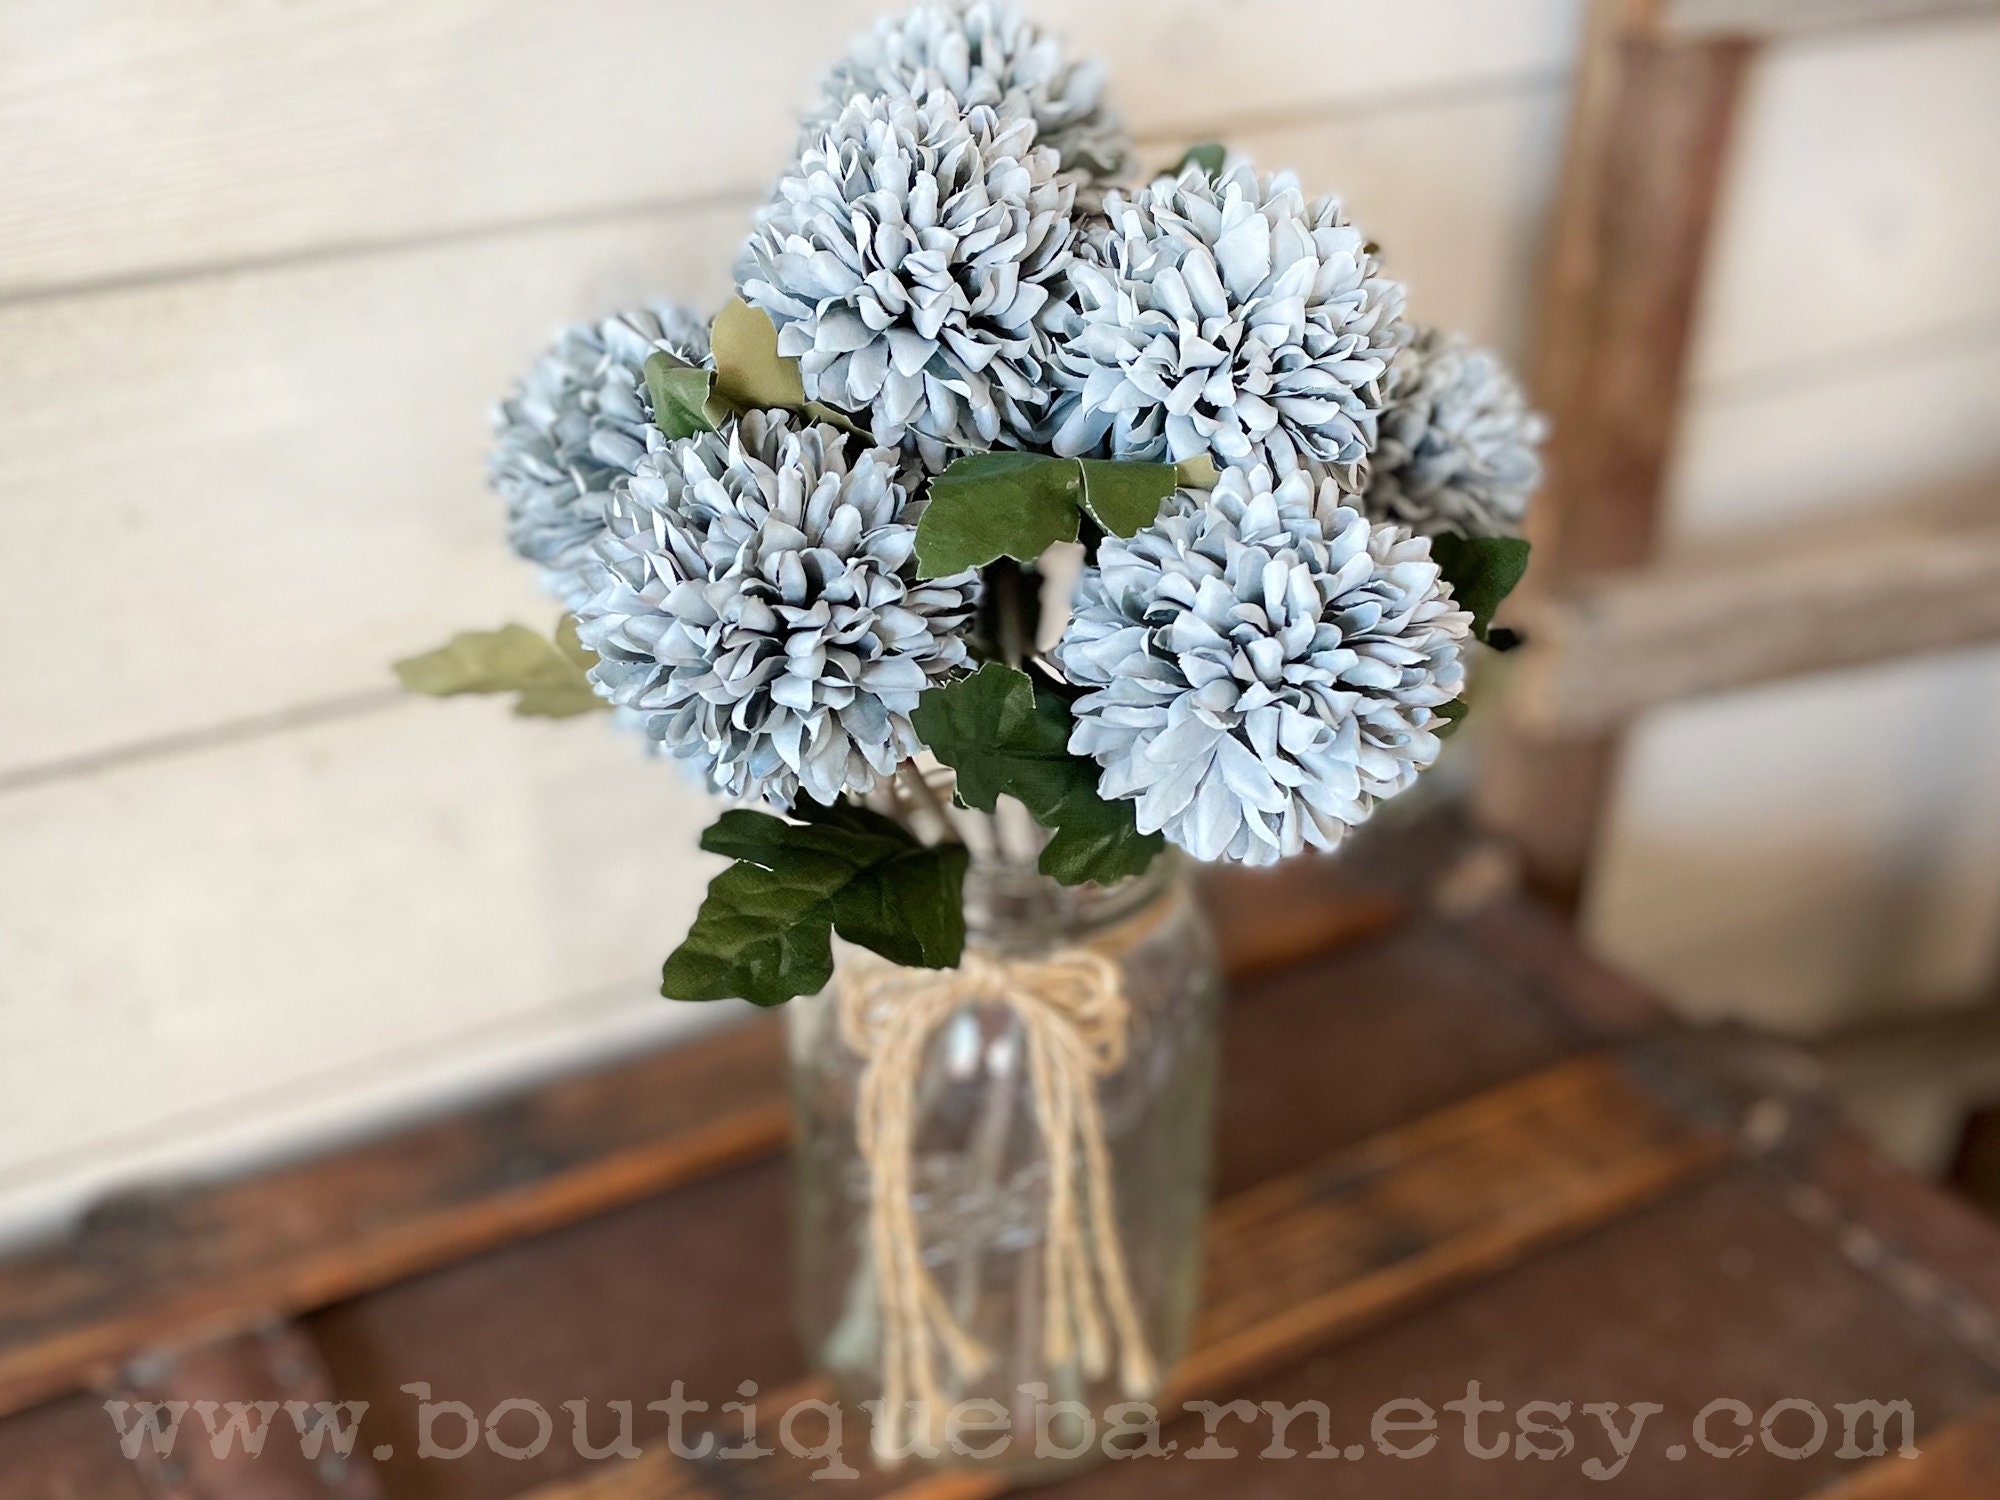 Christmas Greenery for Vase, Frosted Eucalyptus and Berry Spray, Winter  Branches, Winter Flower Arrangement, Rustic Christmas Centerpiece 